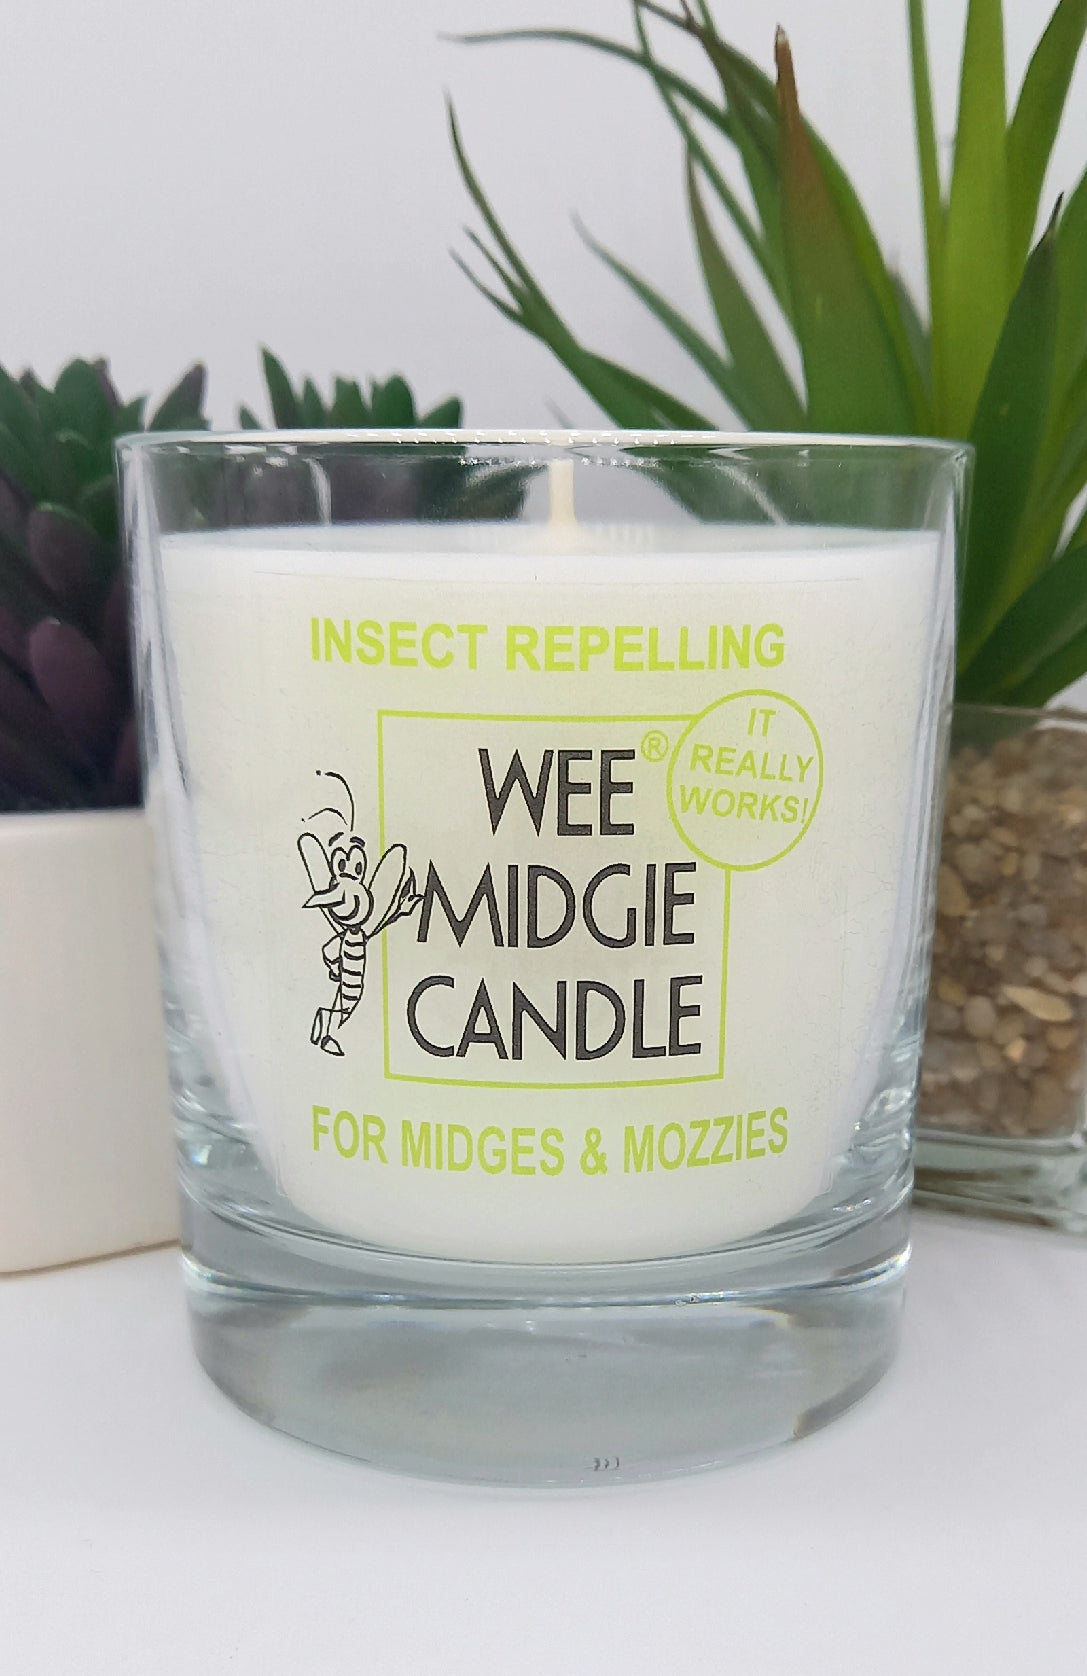 Wee Midgie Insect Repelling Candle Jar